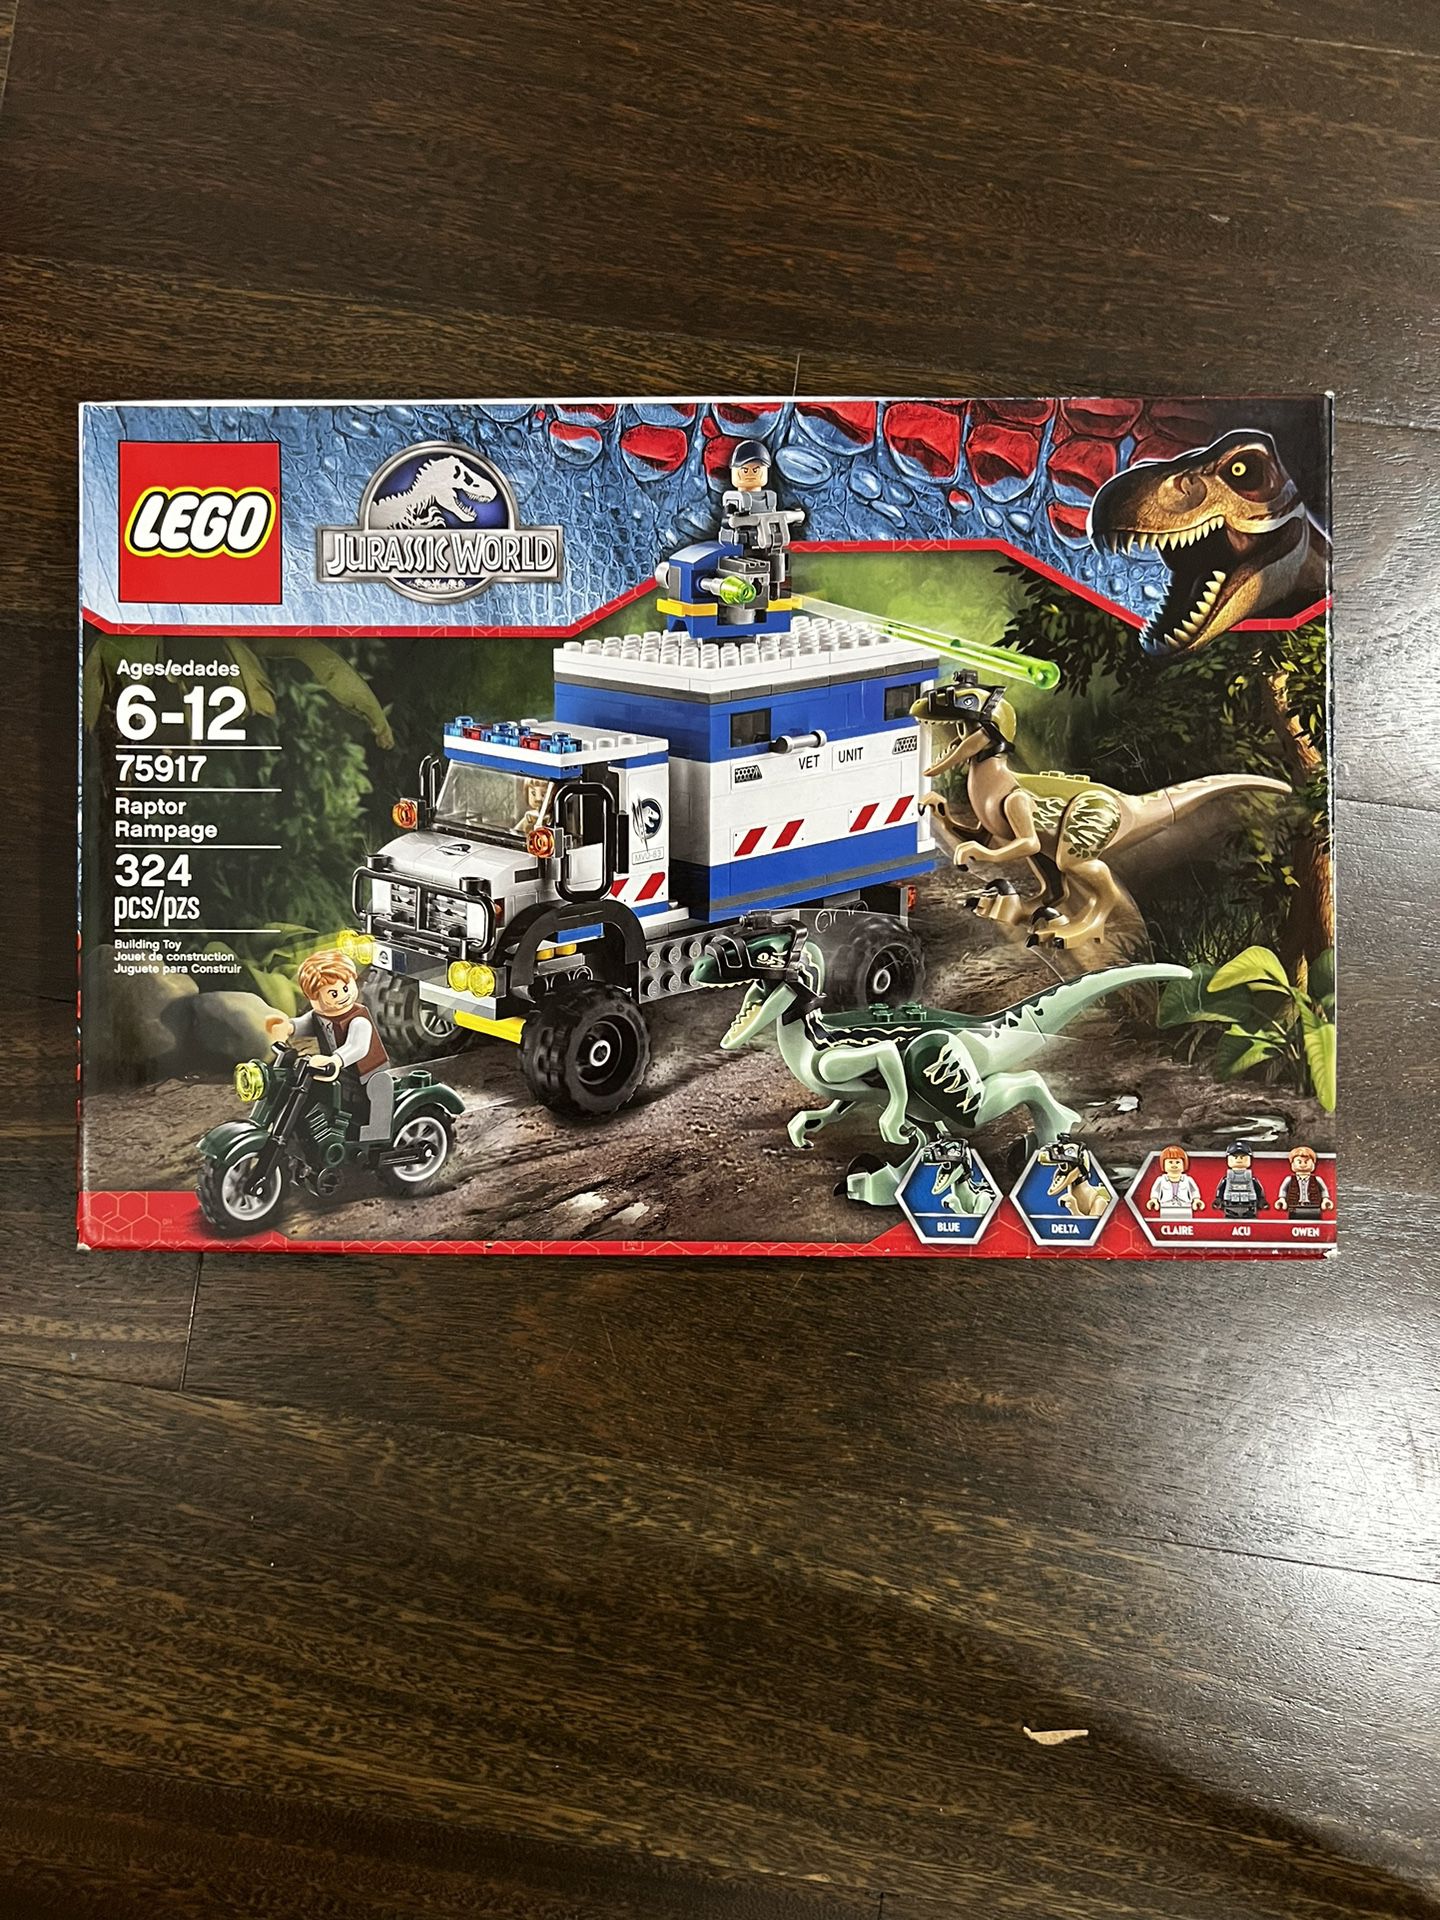 Lego Jurassic Set 75917 in Woodmere, NY - OfferUp